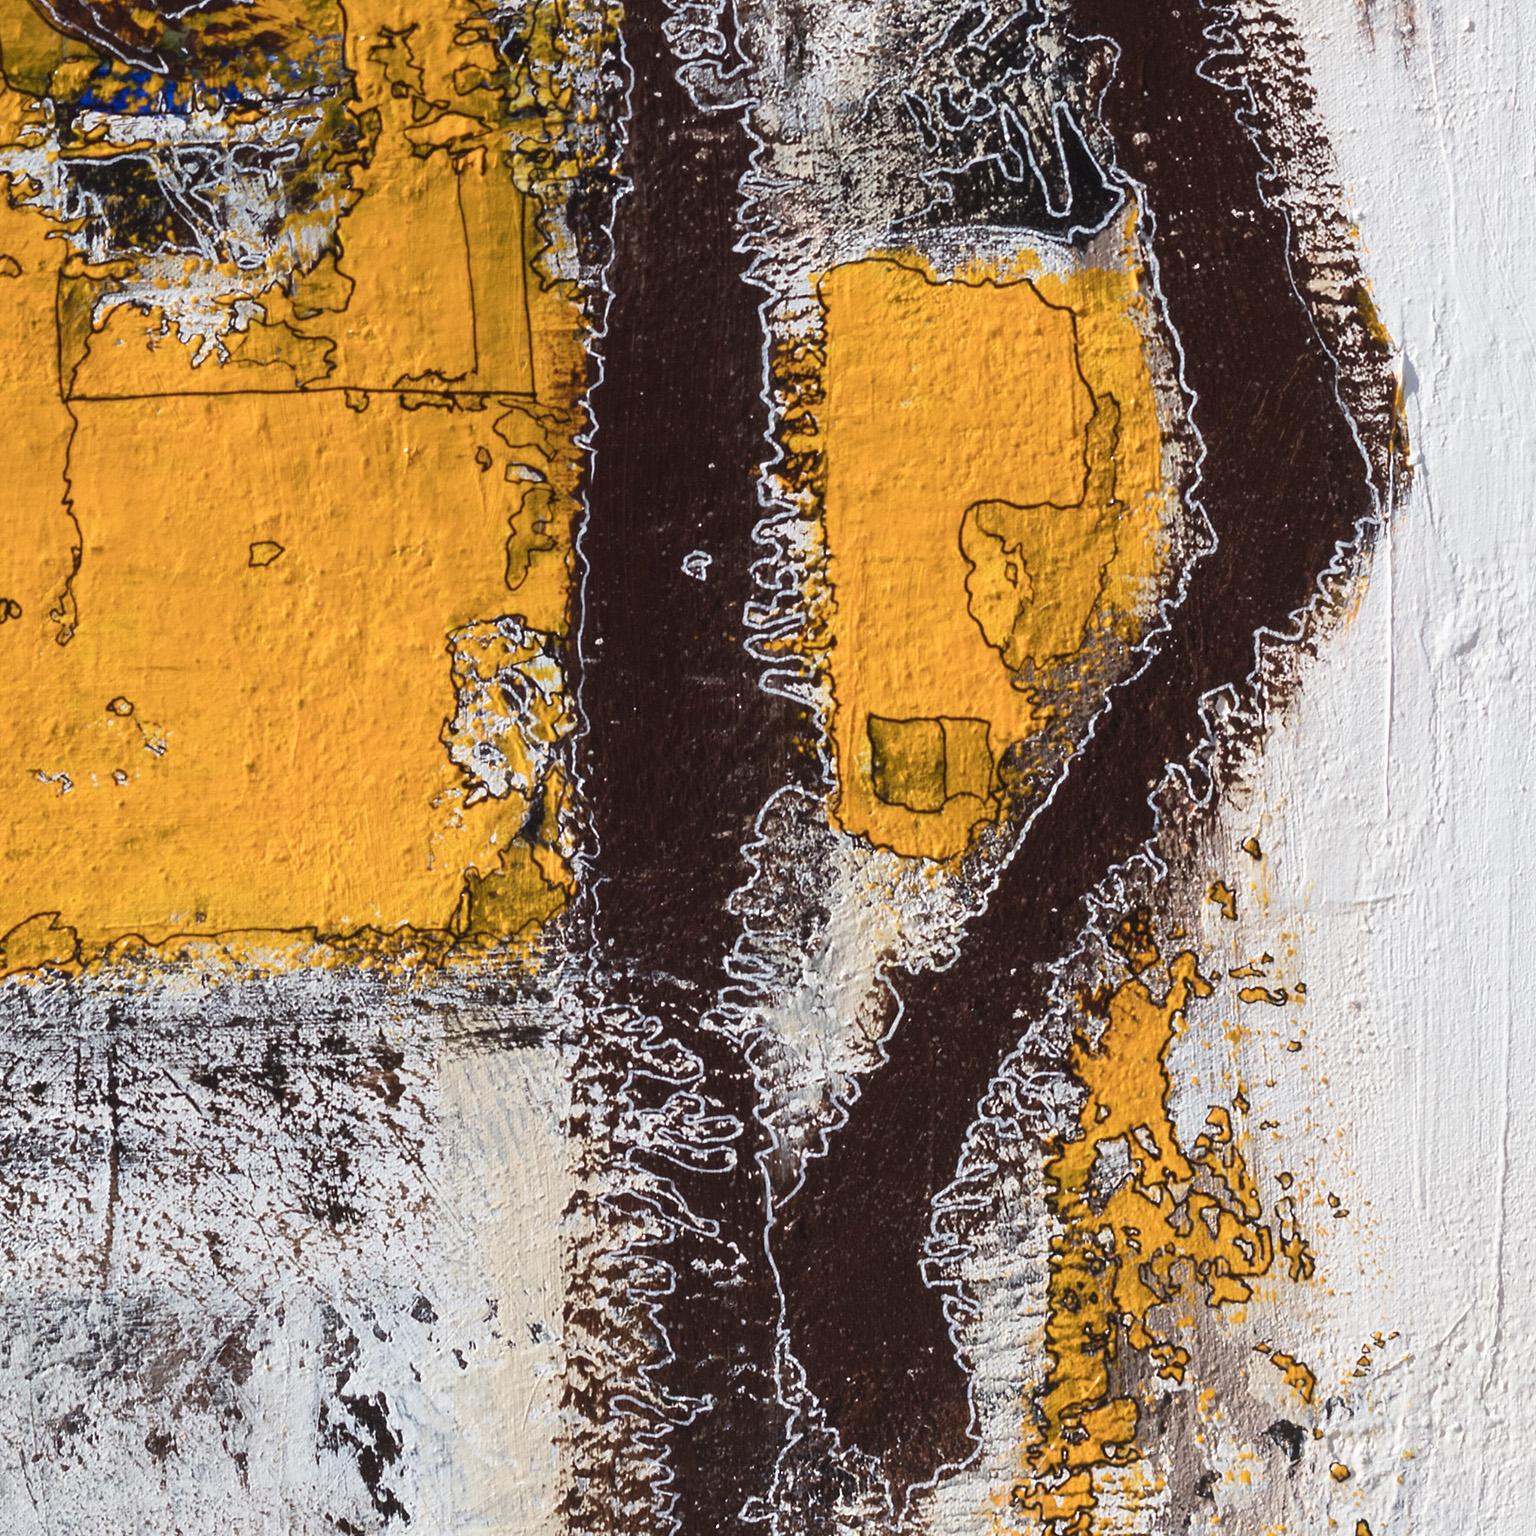 Parris Jaru's Walking the Continuous Path is a 48 x 34 inches abstract oil paint. The main colors are yellow, brown and white. The image represent two horses. The surface is defined by a thick impasto of paint, made with plant based pigments that